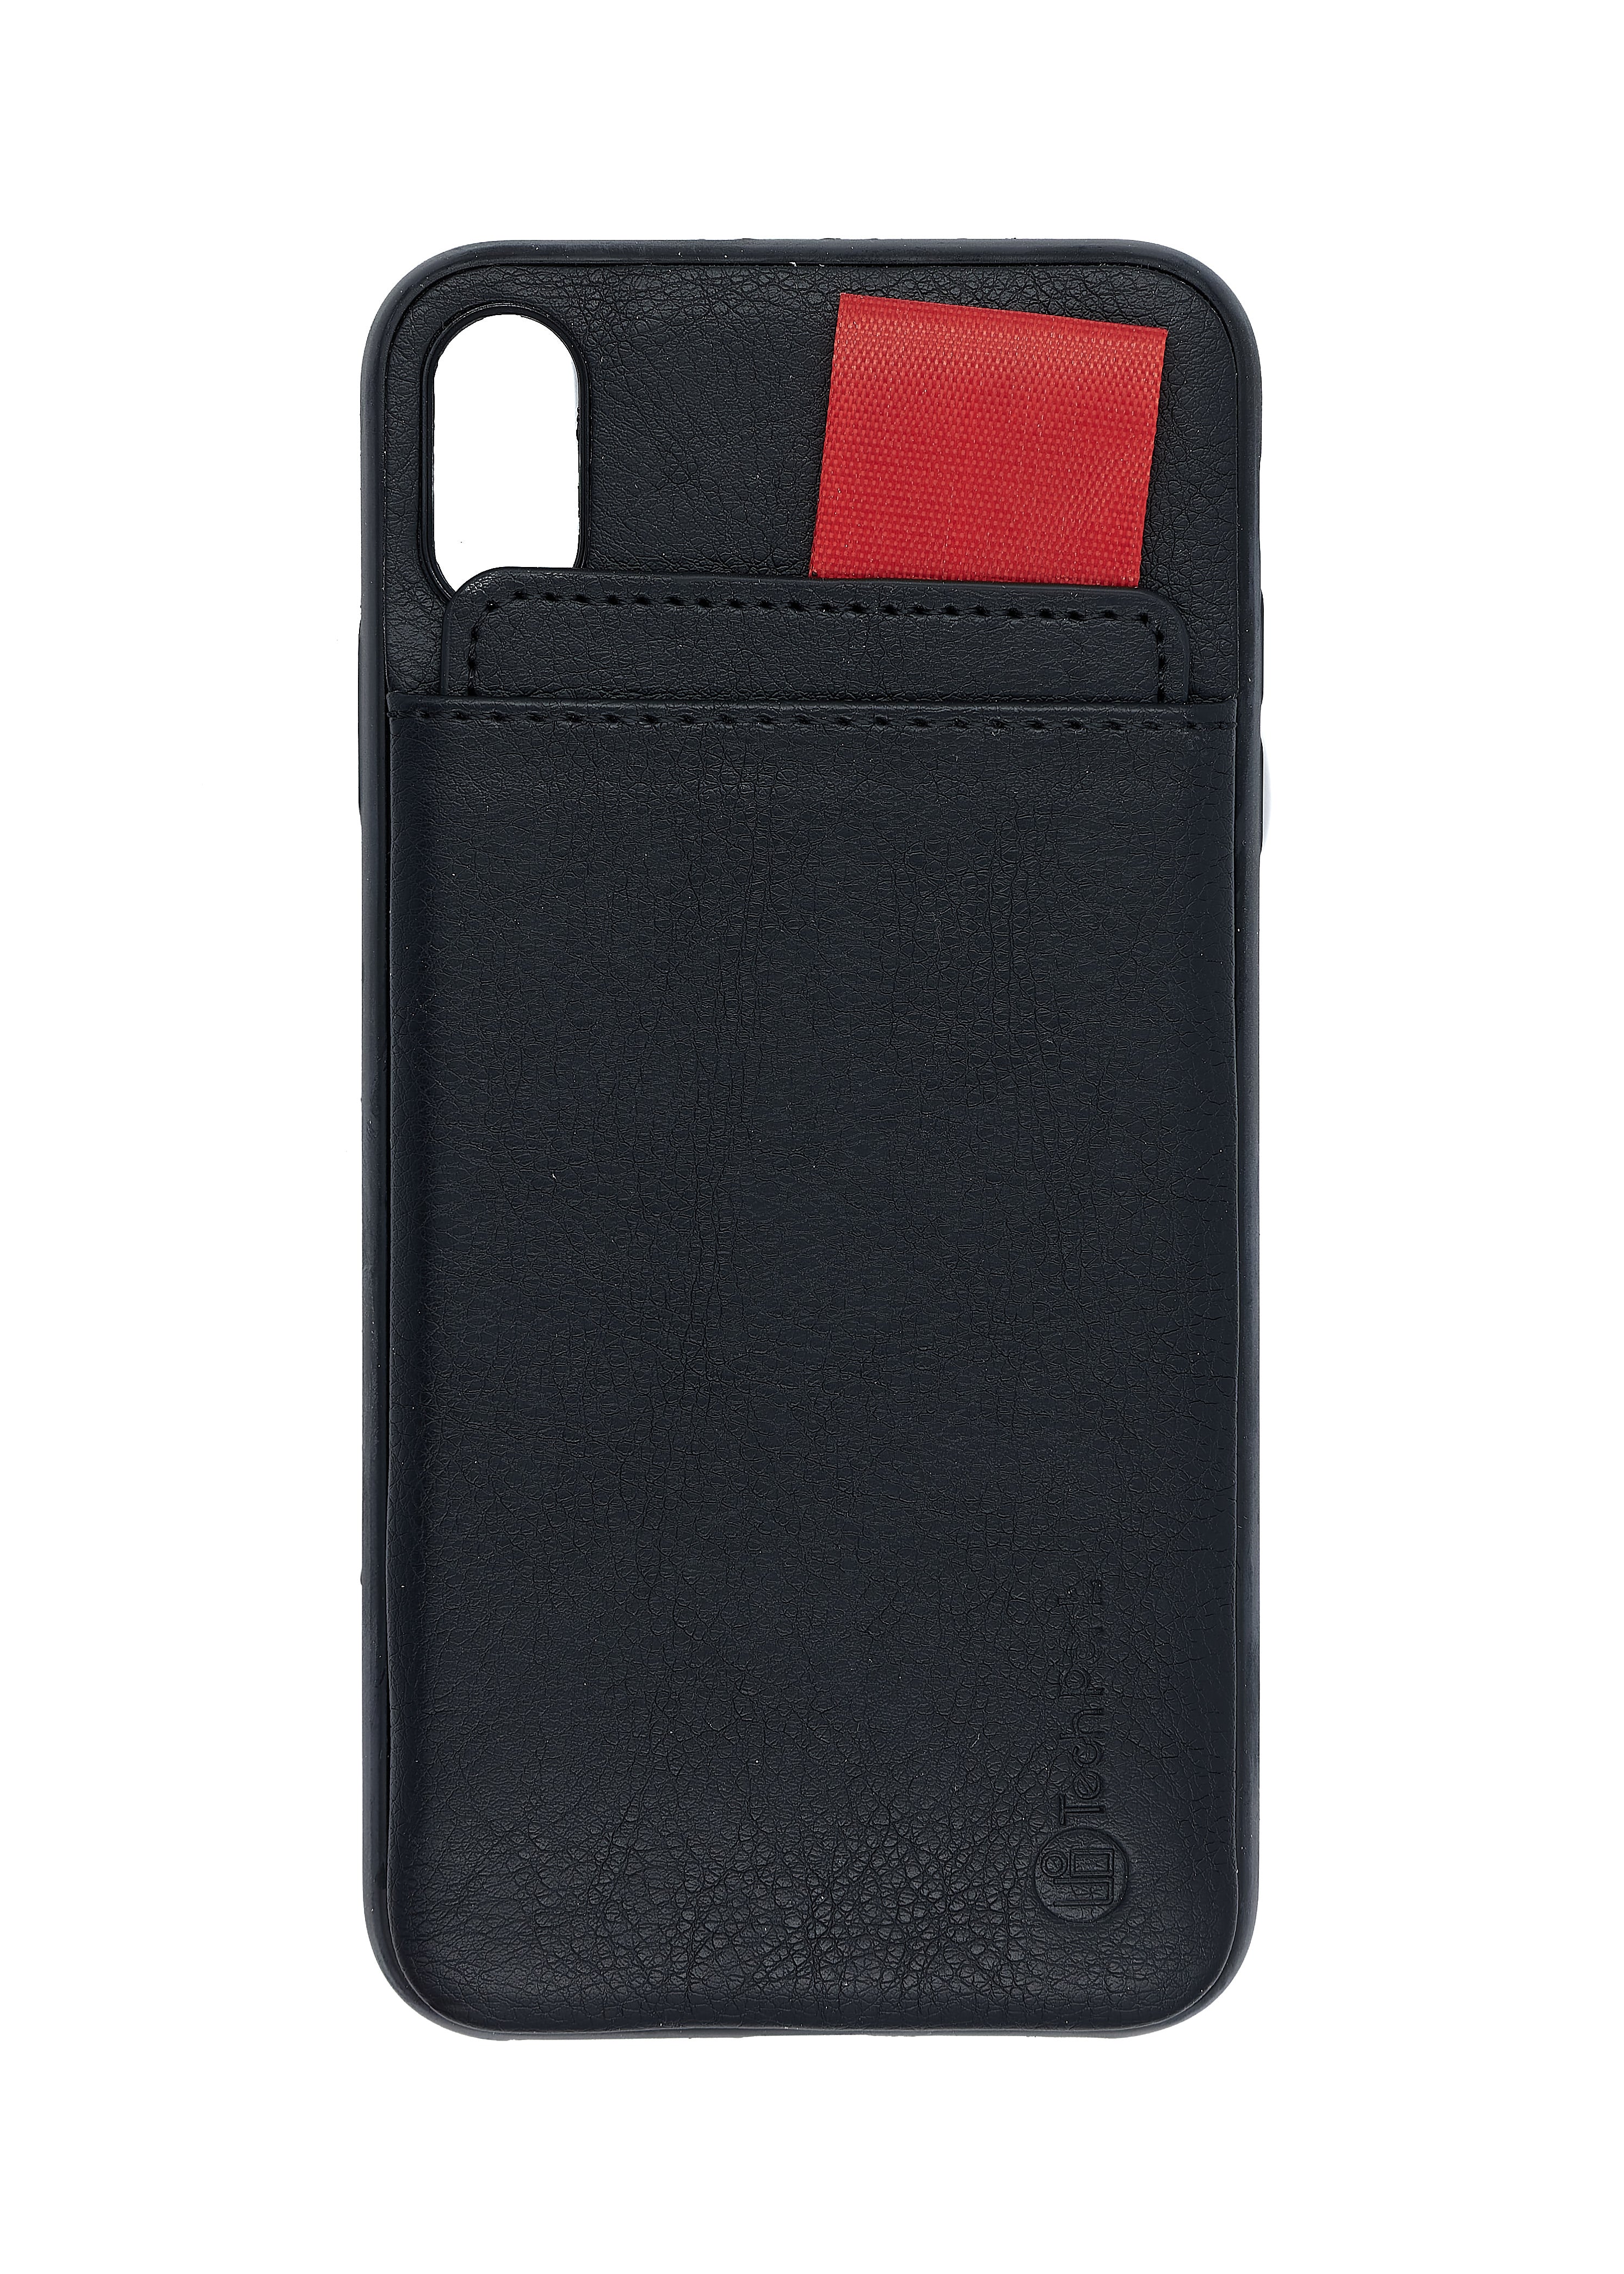 UI Leather iPhone Case with Card Holder